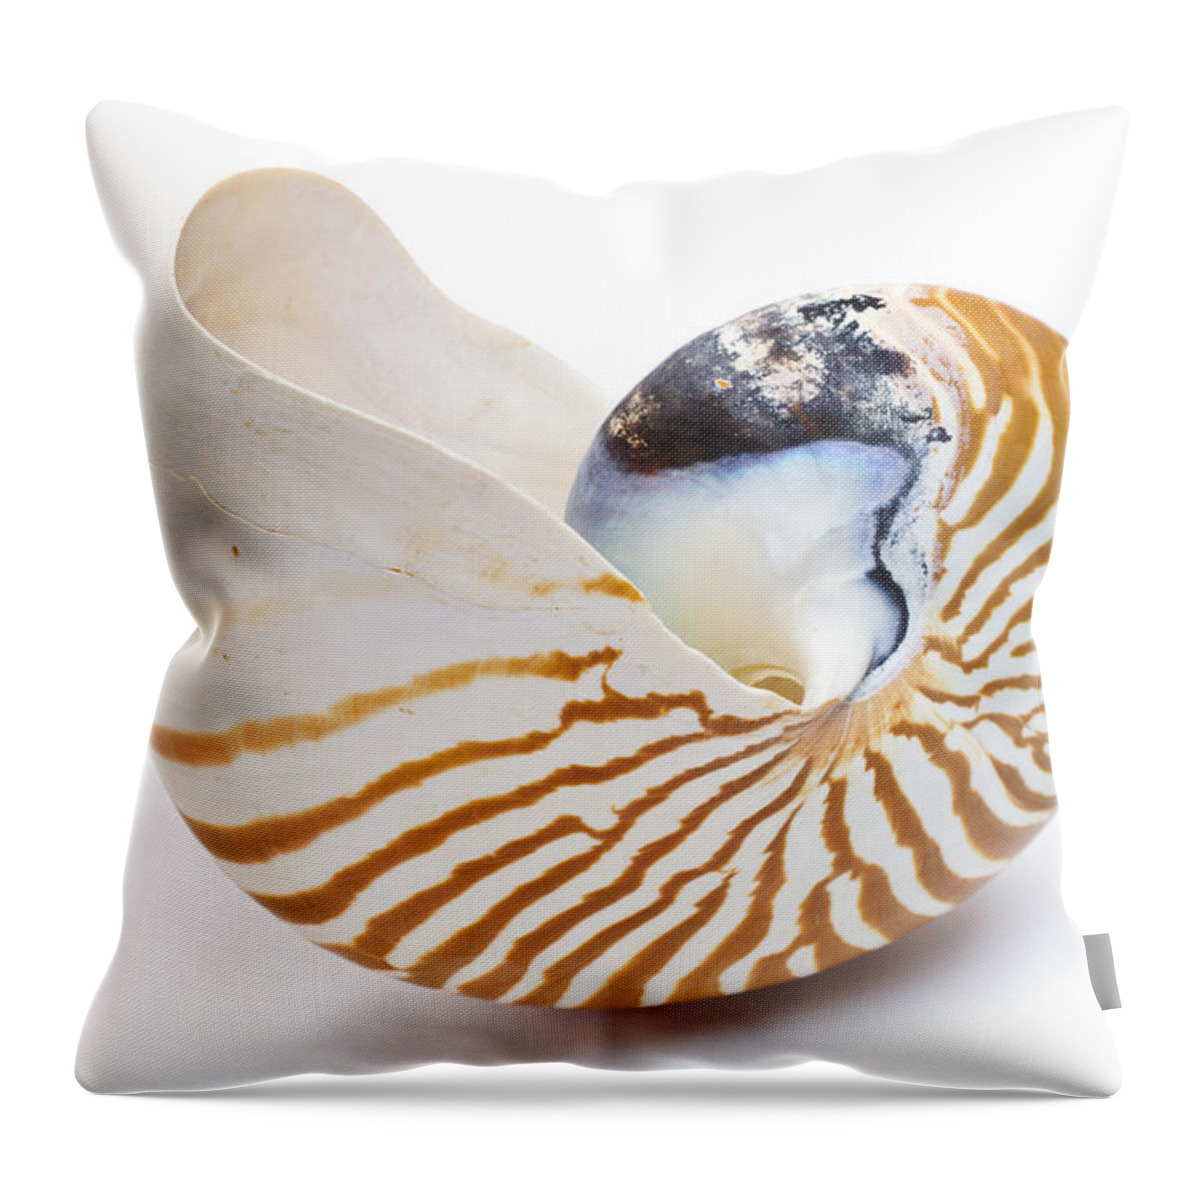 00478815 Throw Pillow featuring the photograph Chambered Nautilus Shell by Piotr Naskrecki